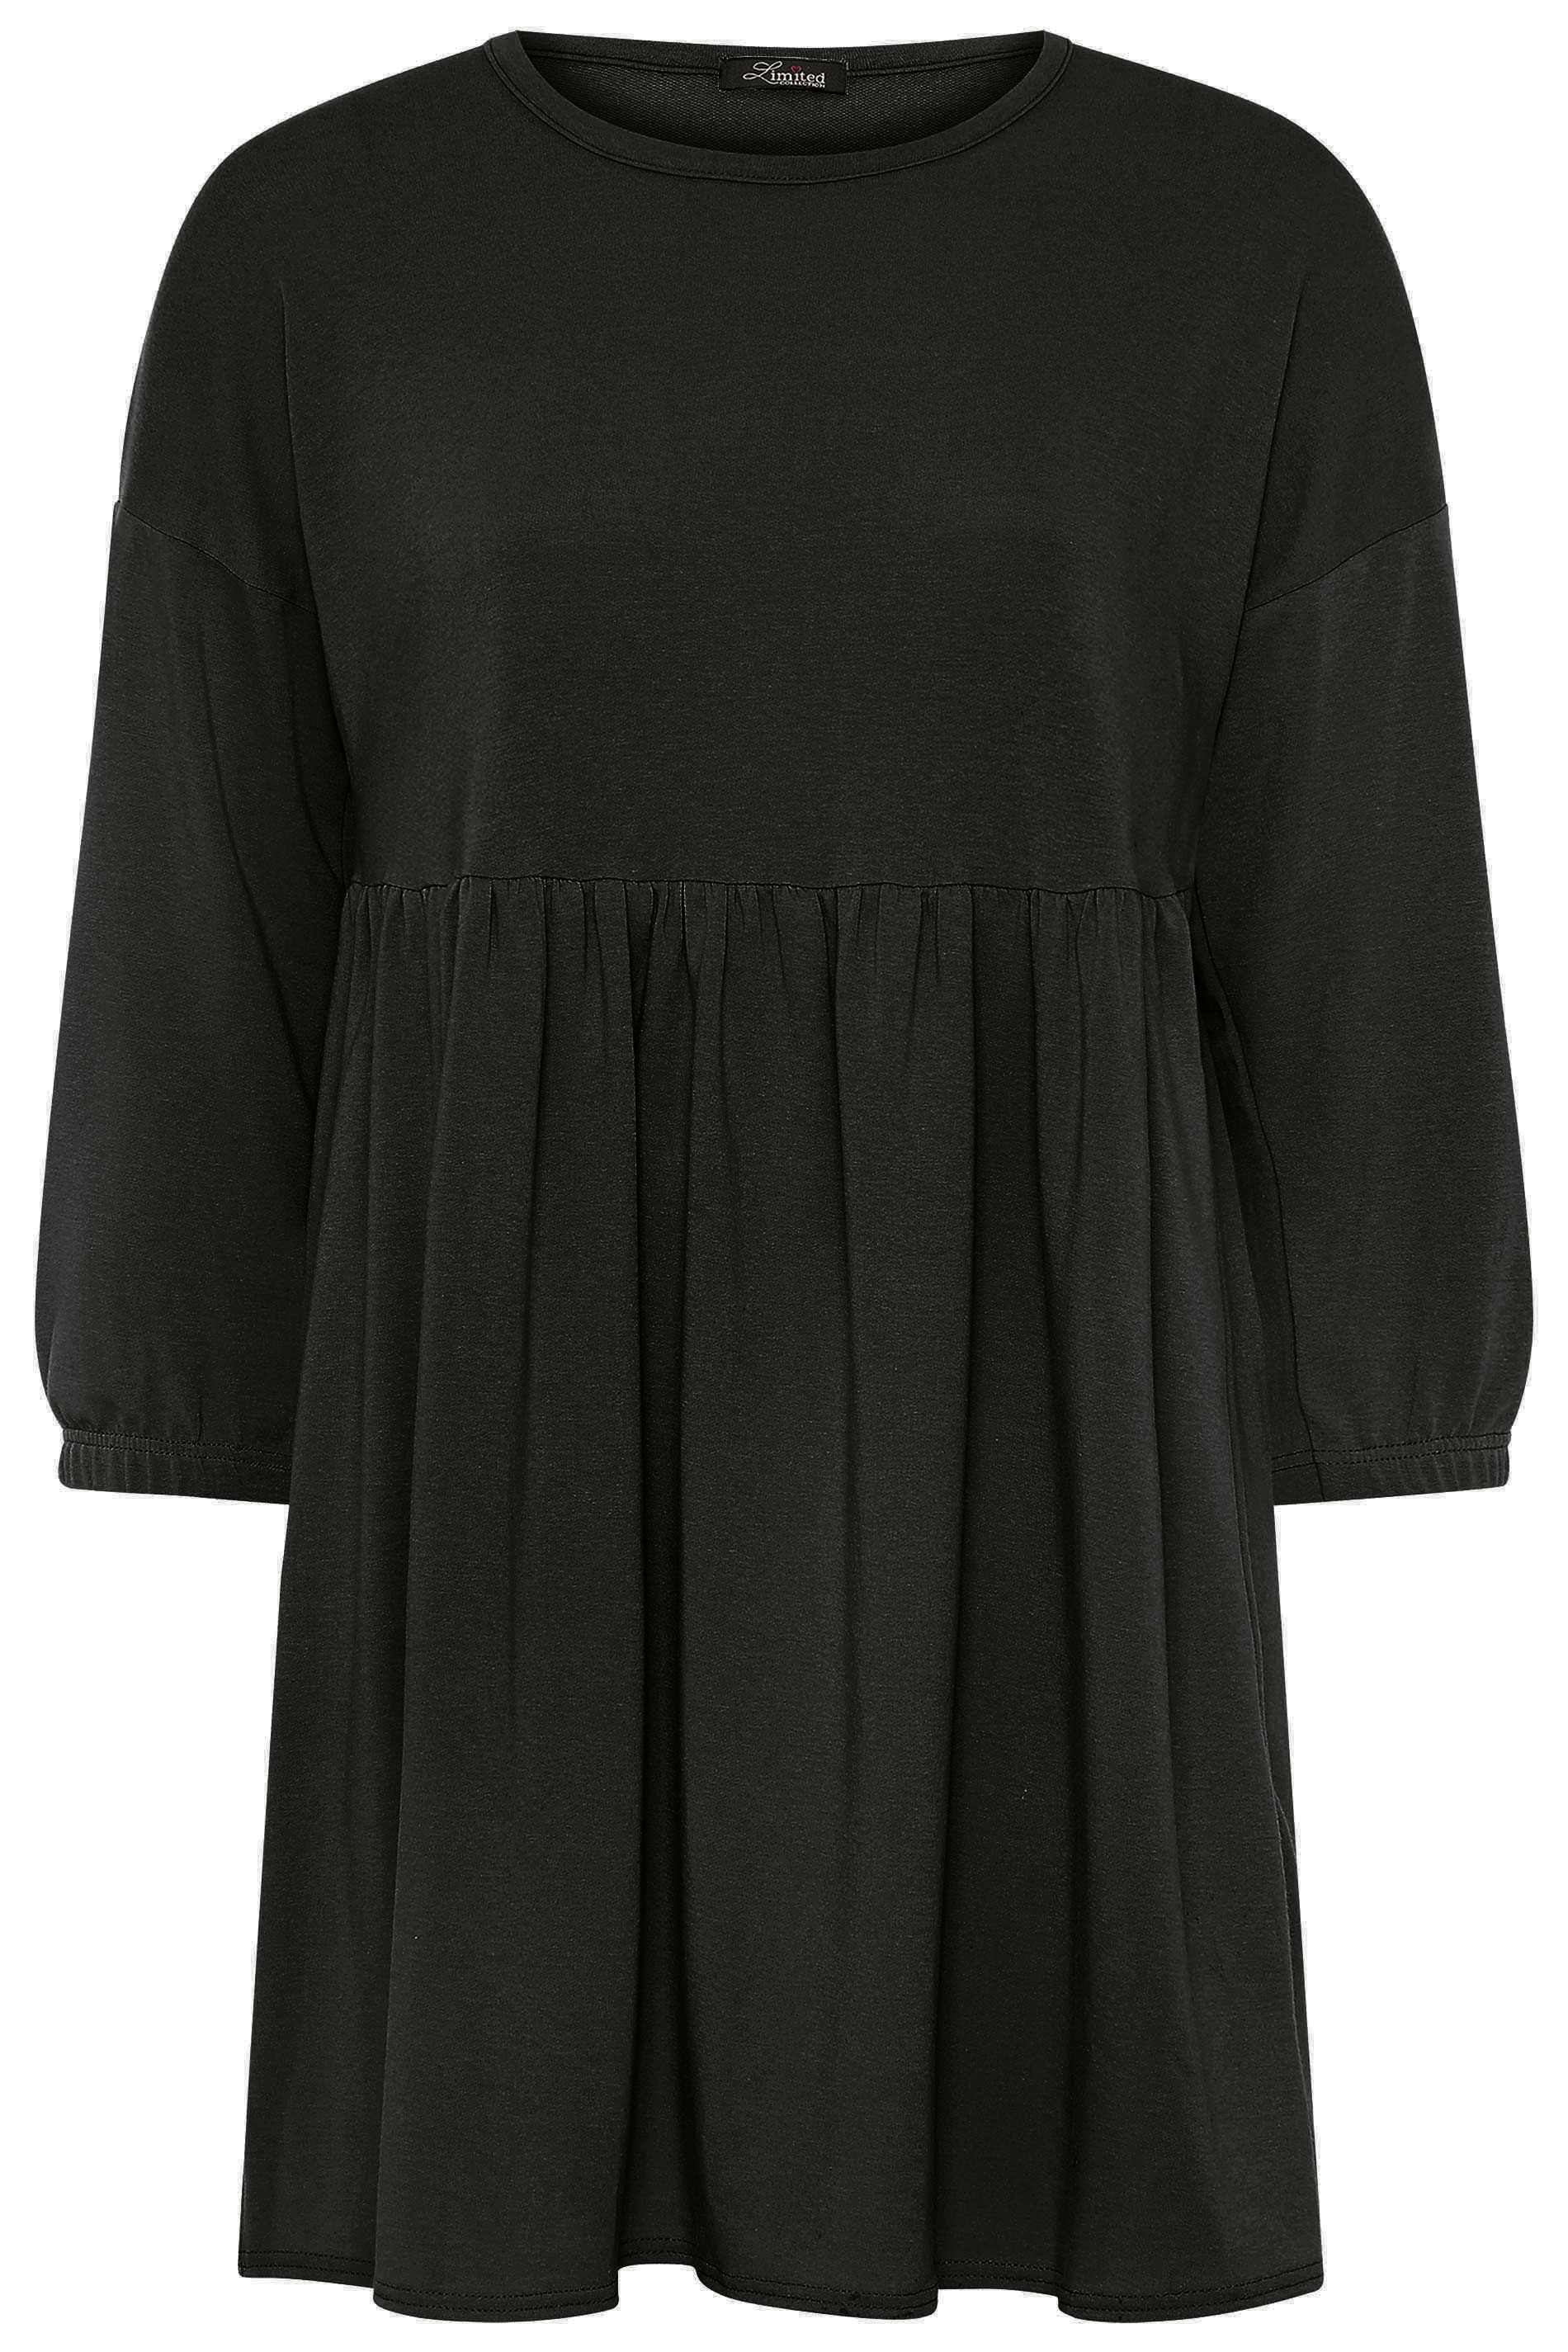 LIMITED COLLECTION Black Peplum Sweatshirt Dress | Yours Clothing